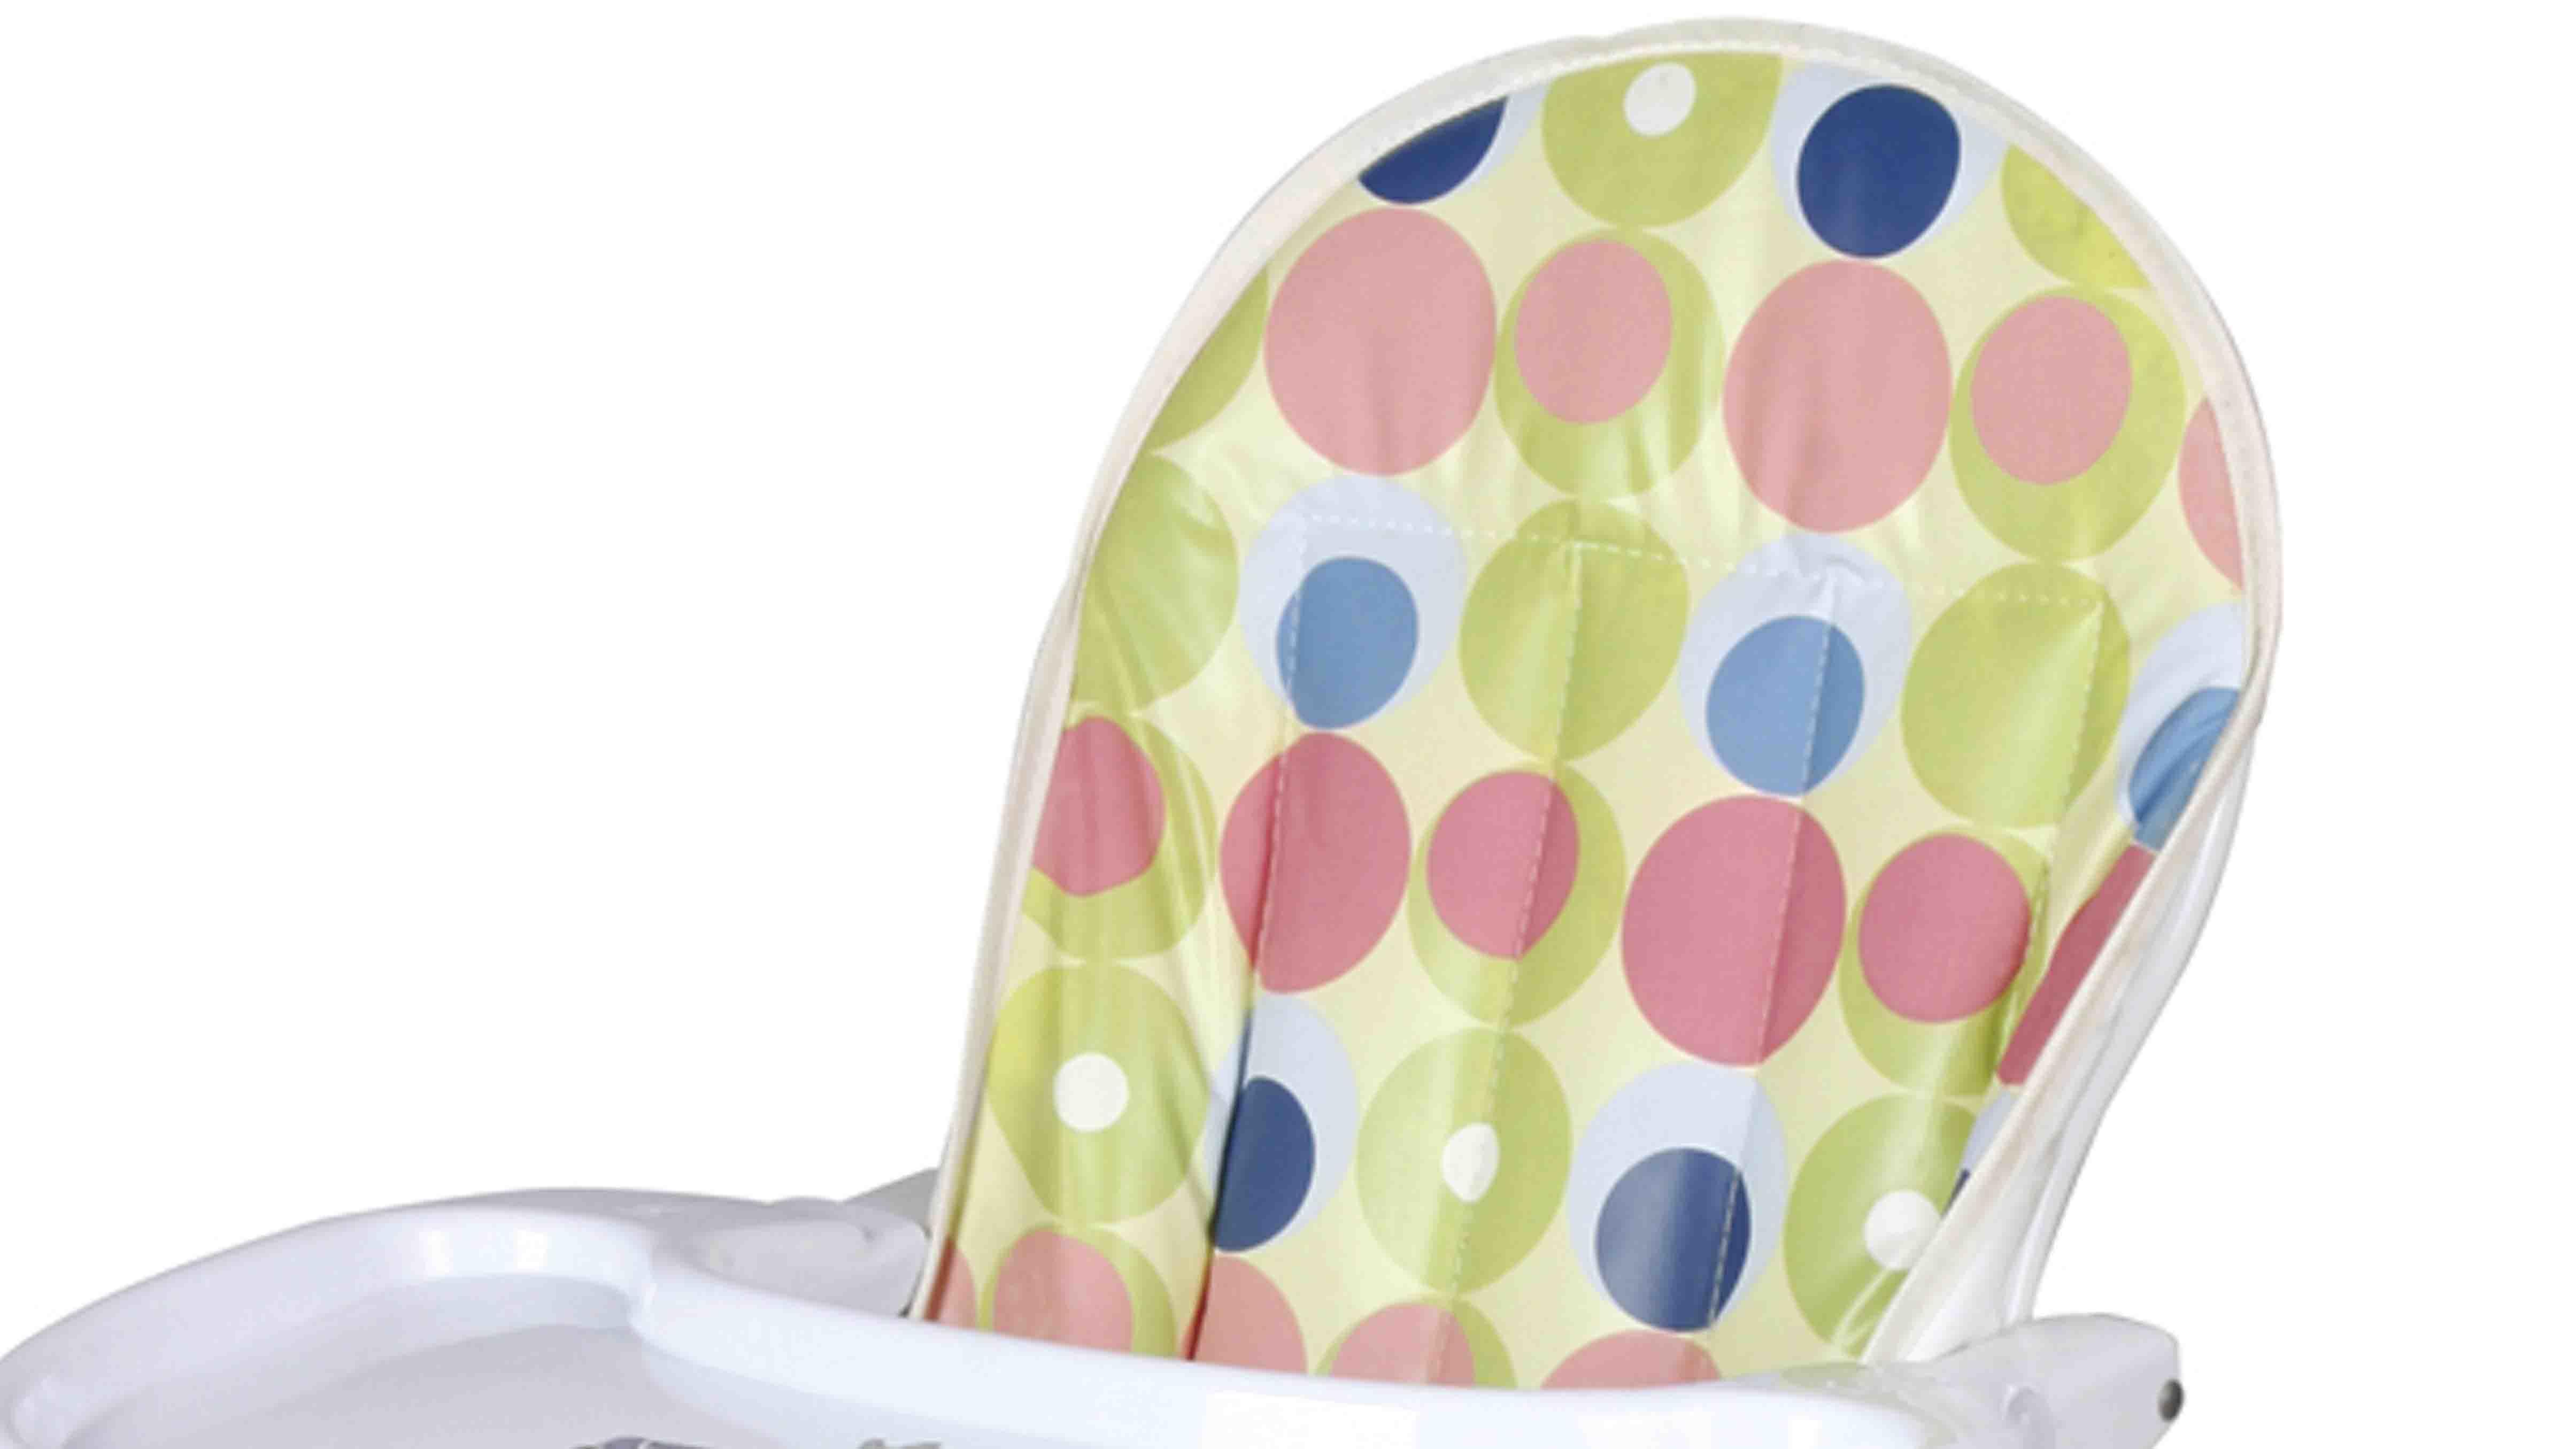 Aoqi special baby chair price from China for infant-2